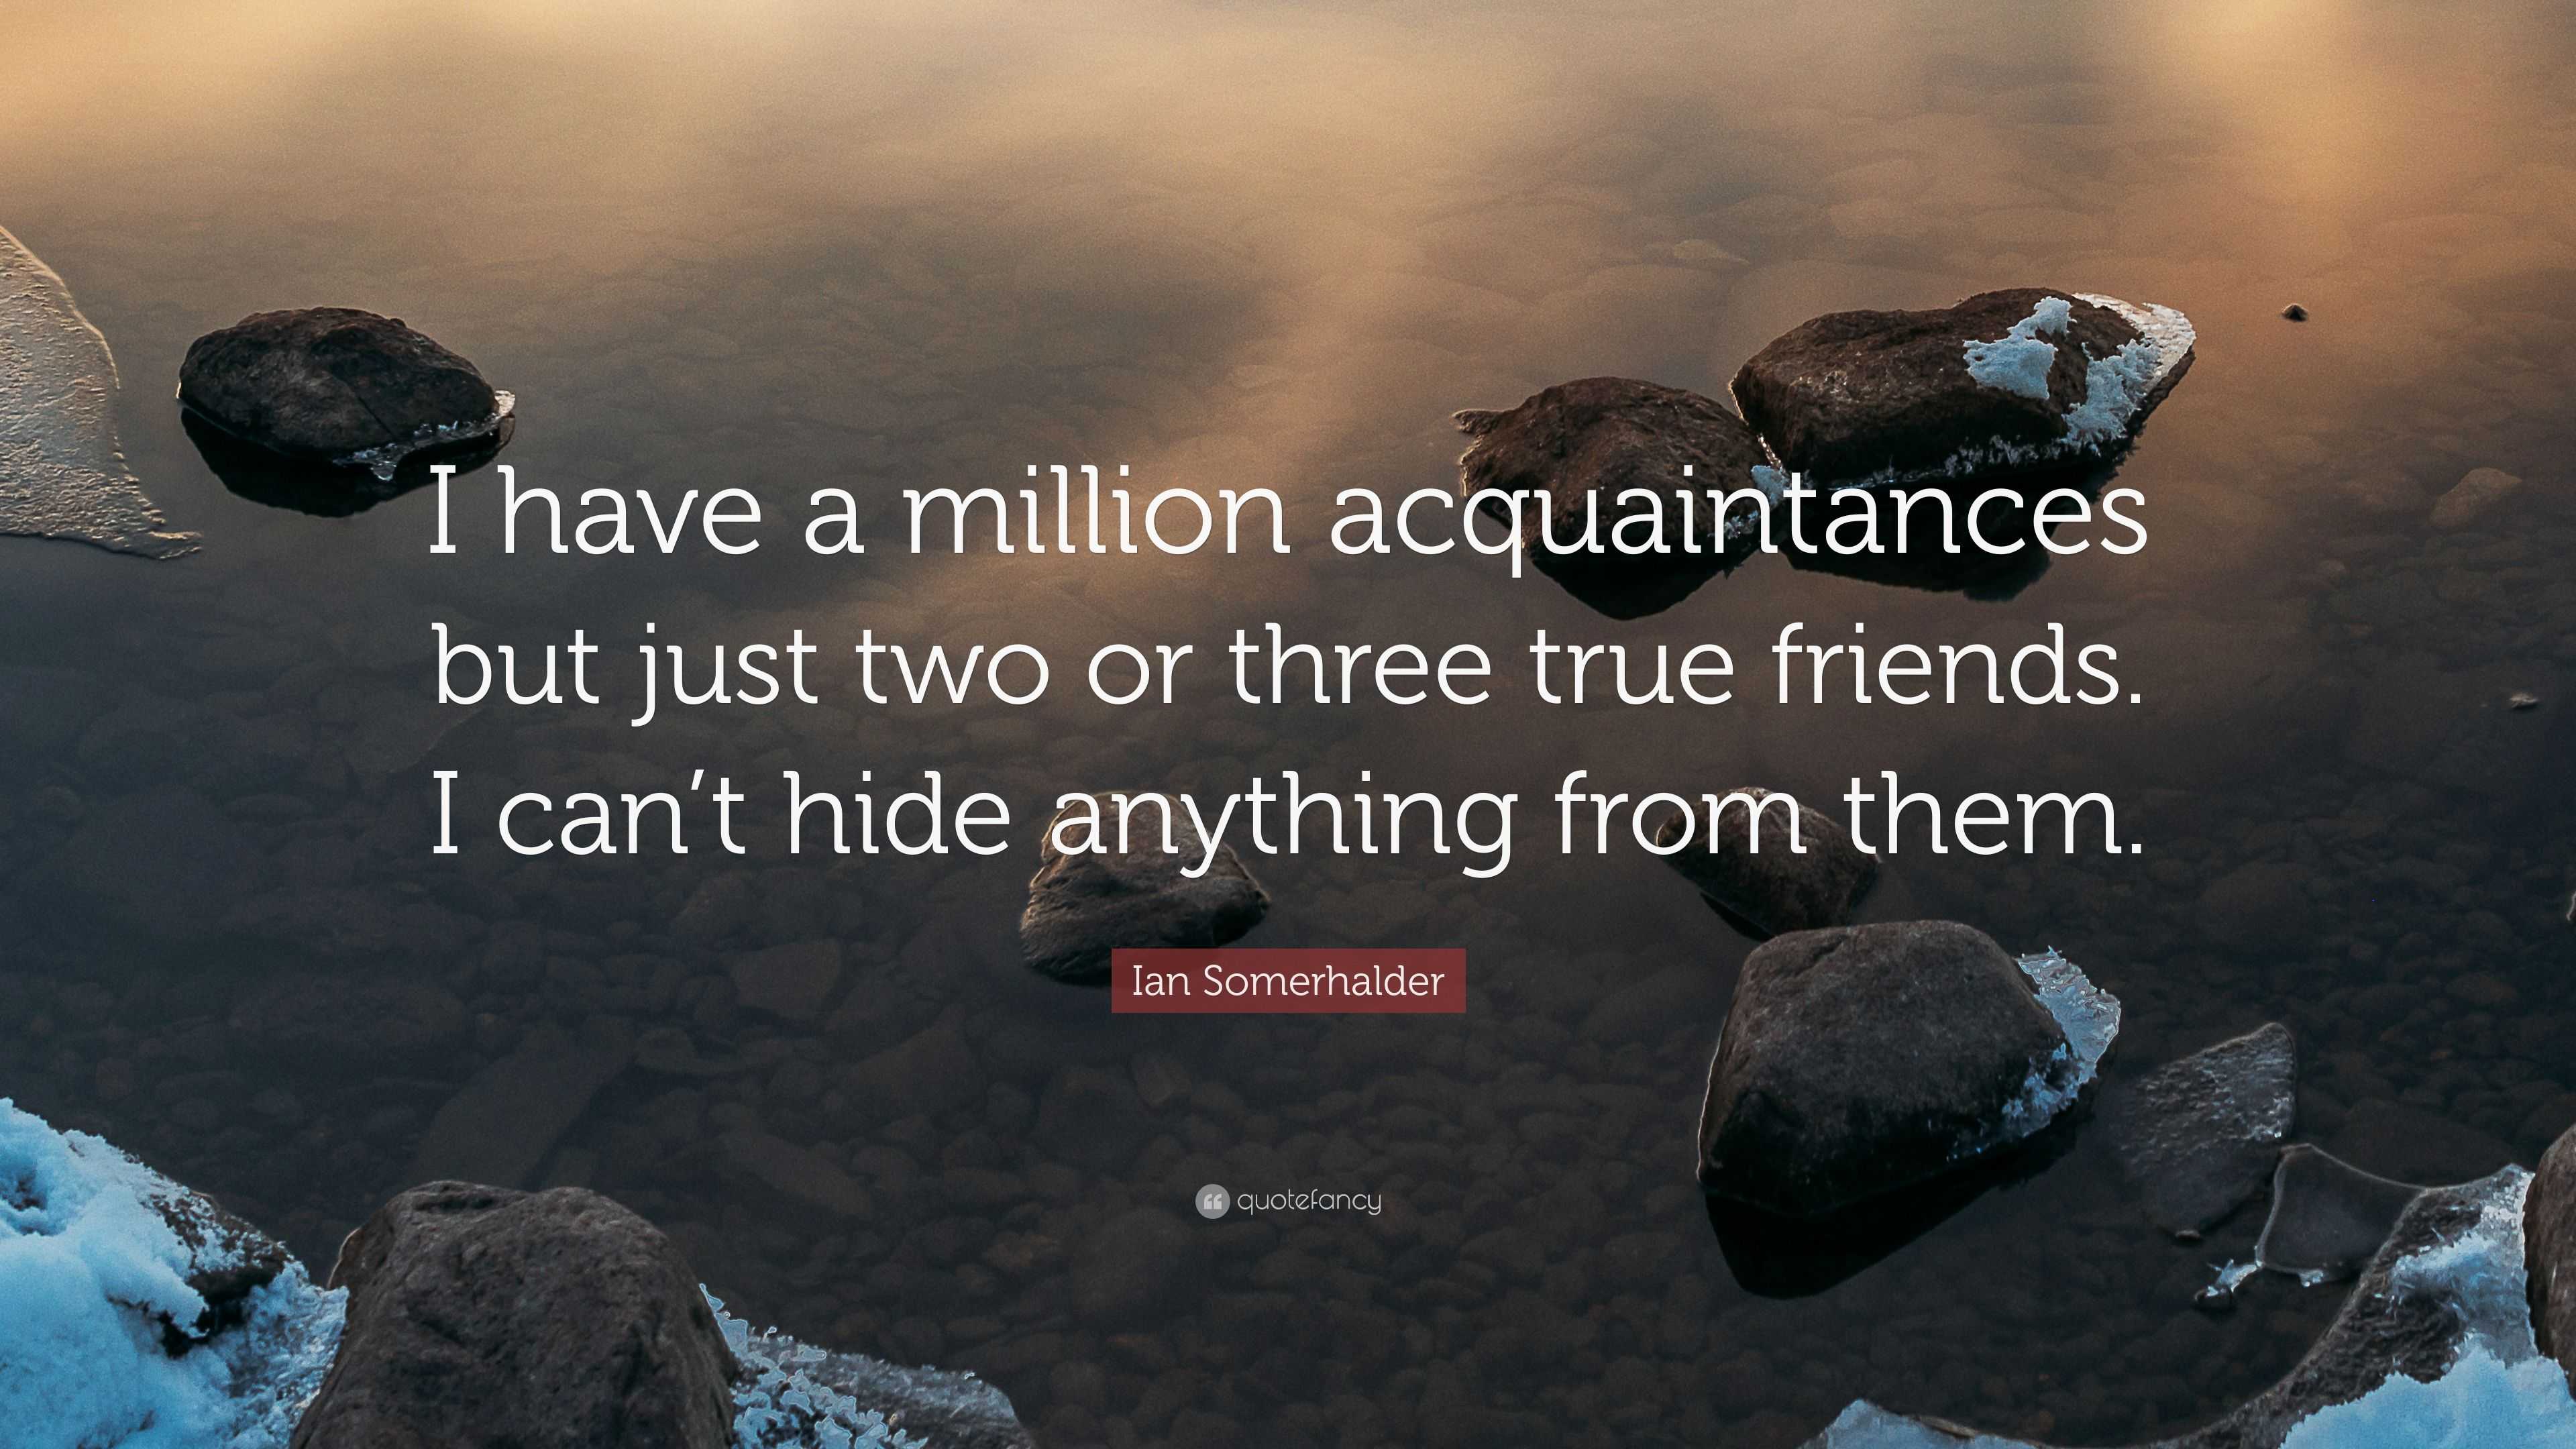 Ian Somerhalder Quote I Have A Million Acquaintances But Just Two Or Three True Friends I